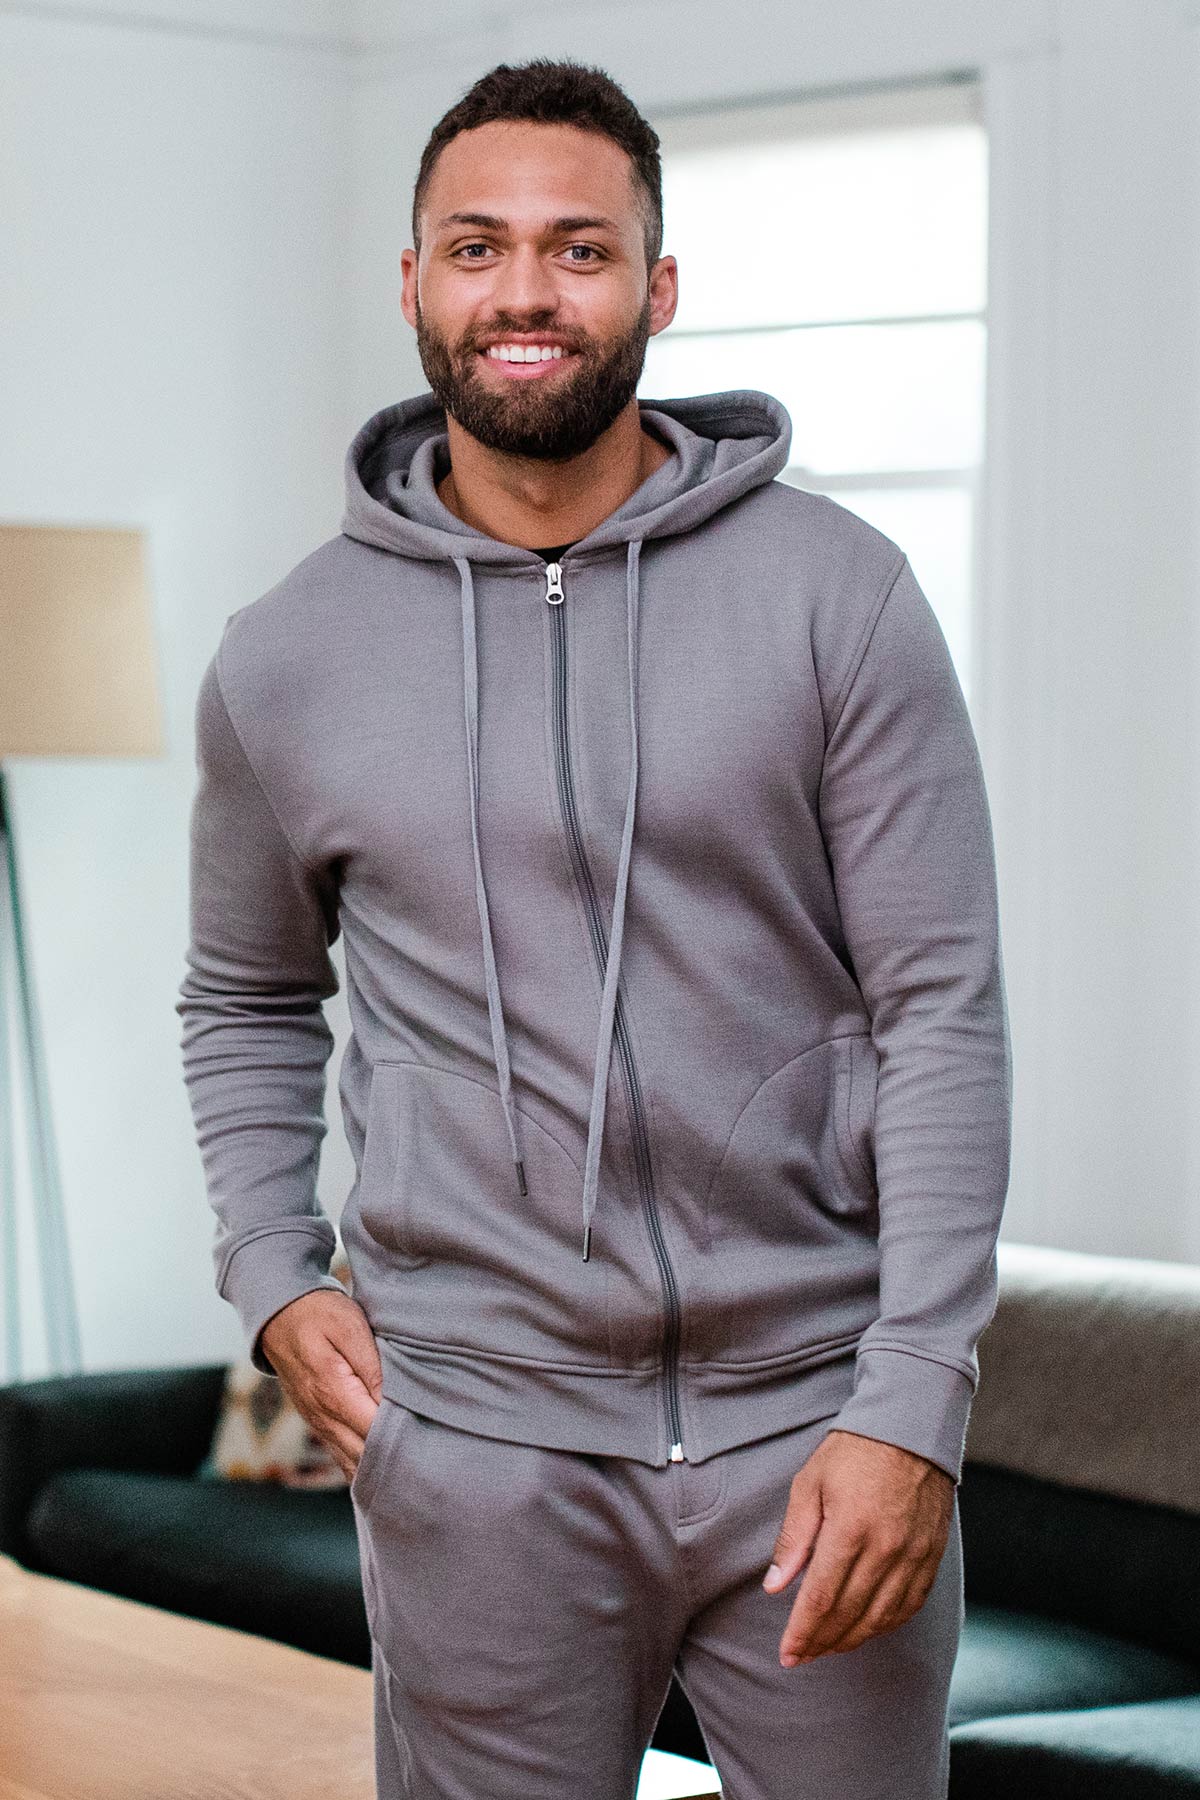 A man stnding and smiling with one hand in his pants pocket, wearing Yala Joey Men's Zip-Up Bamboo and Organic Cotton Sweatshirt Hooded Jacket in Space Grey